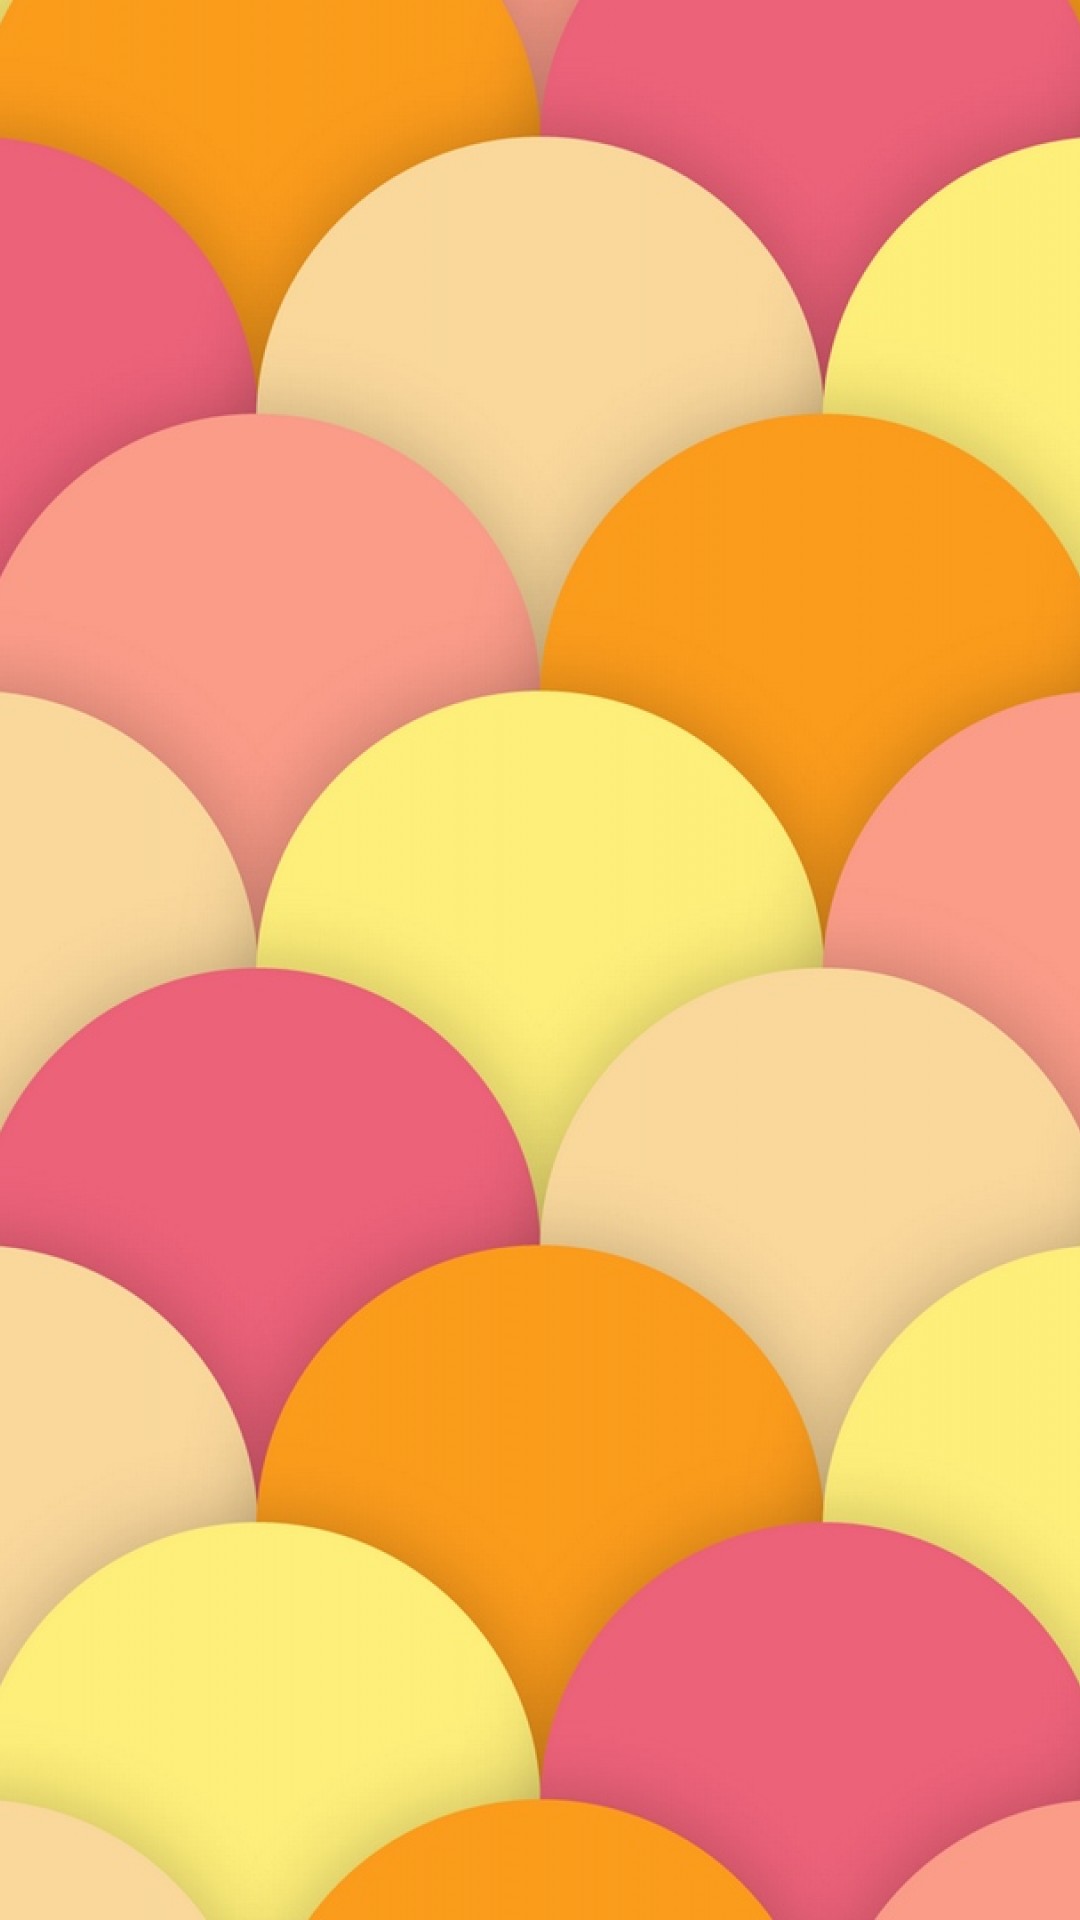 Colorful oval shapes HD Wallpaper